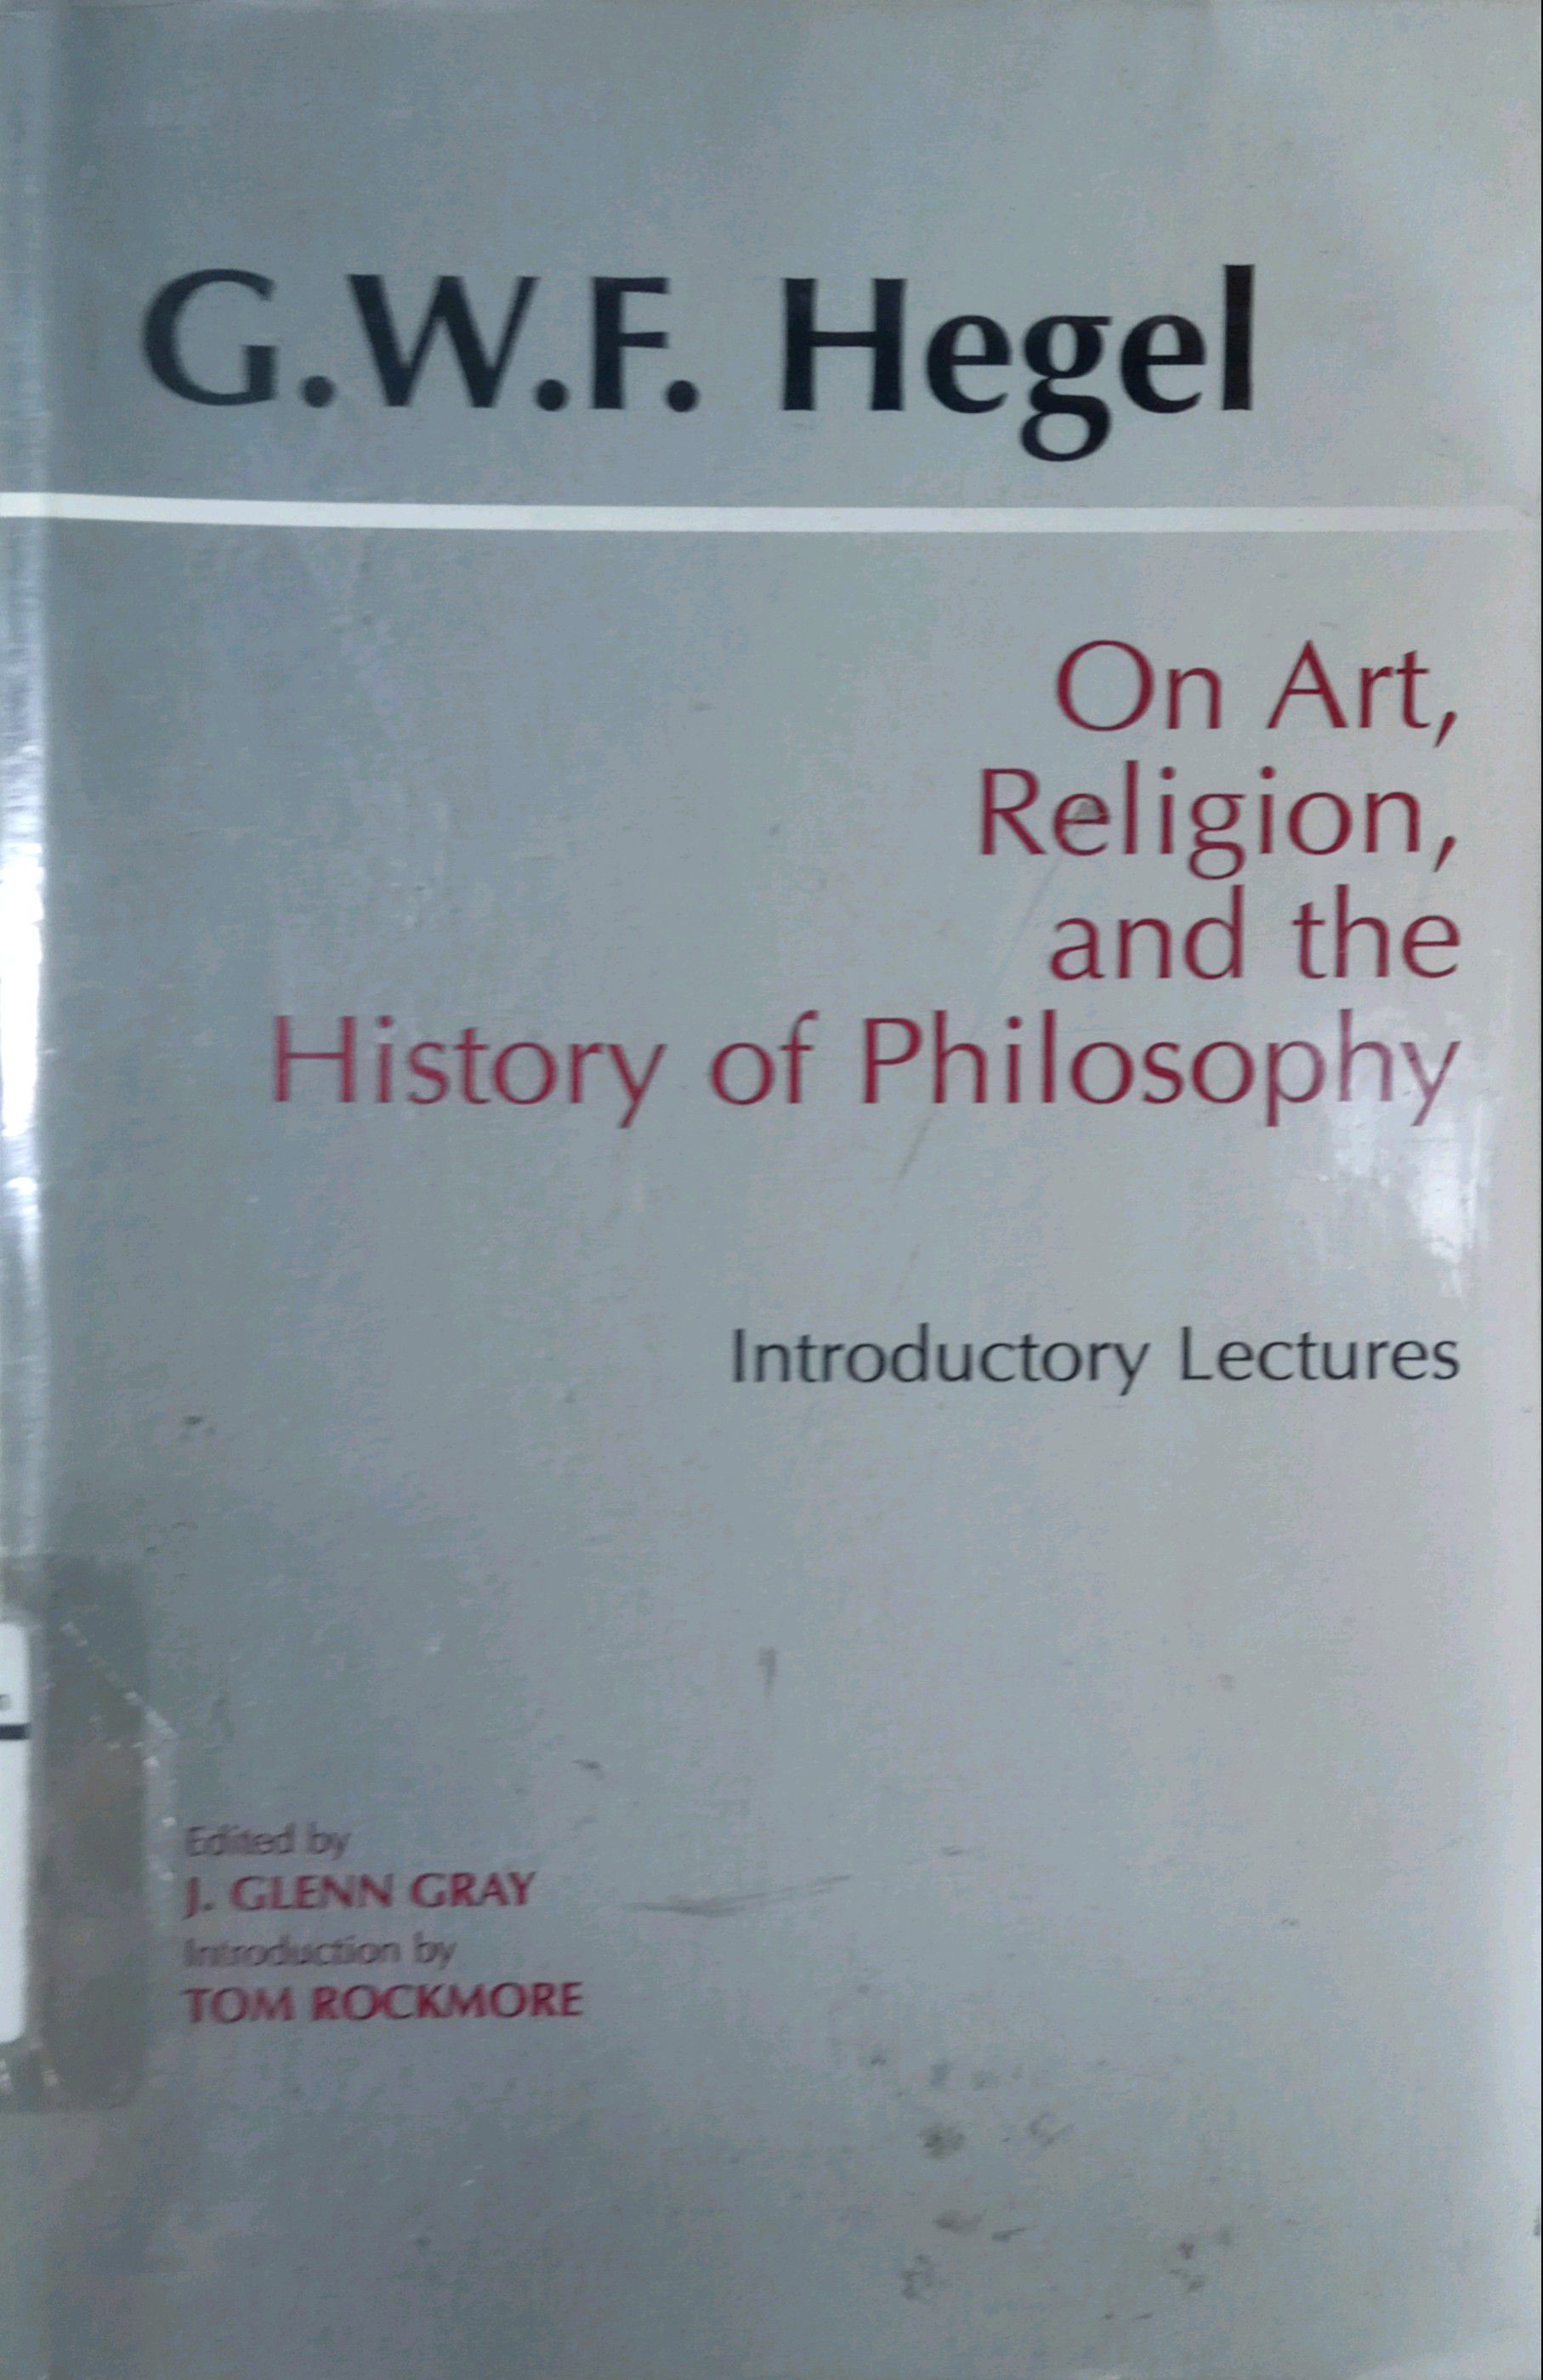 ON ART, RELIGION, AND THE HISTORY OF PHILOSOPHY